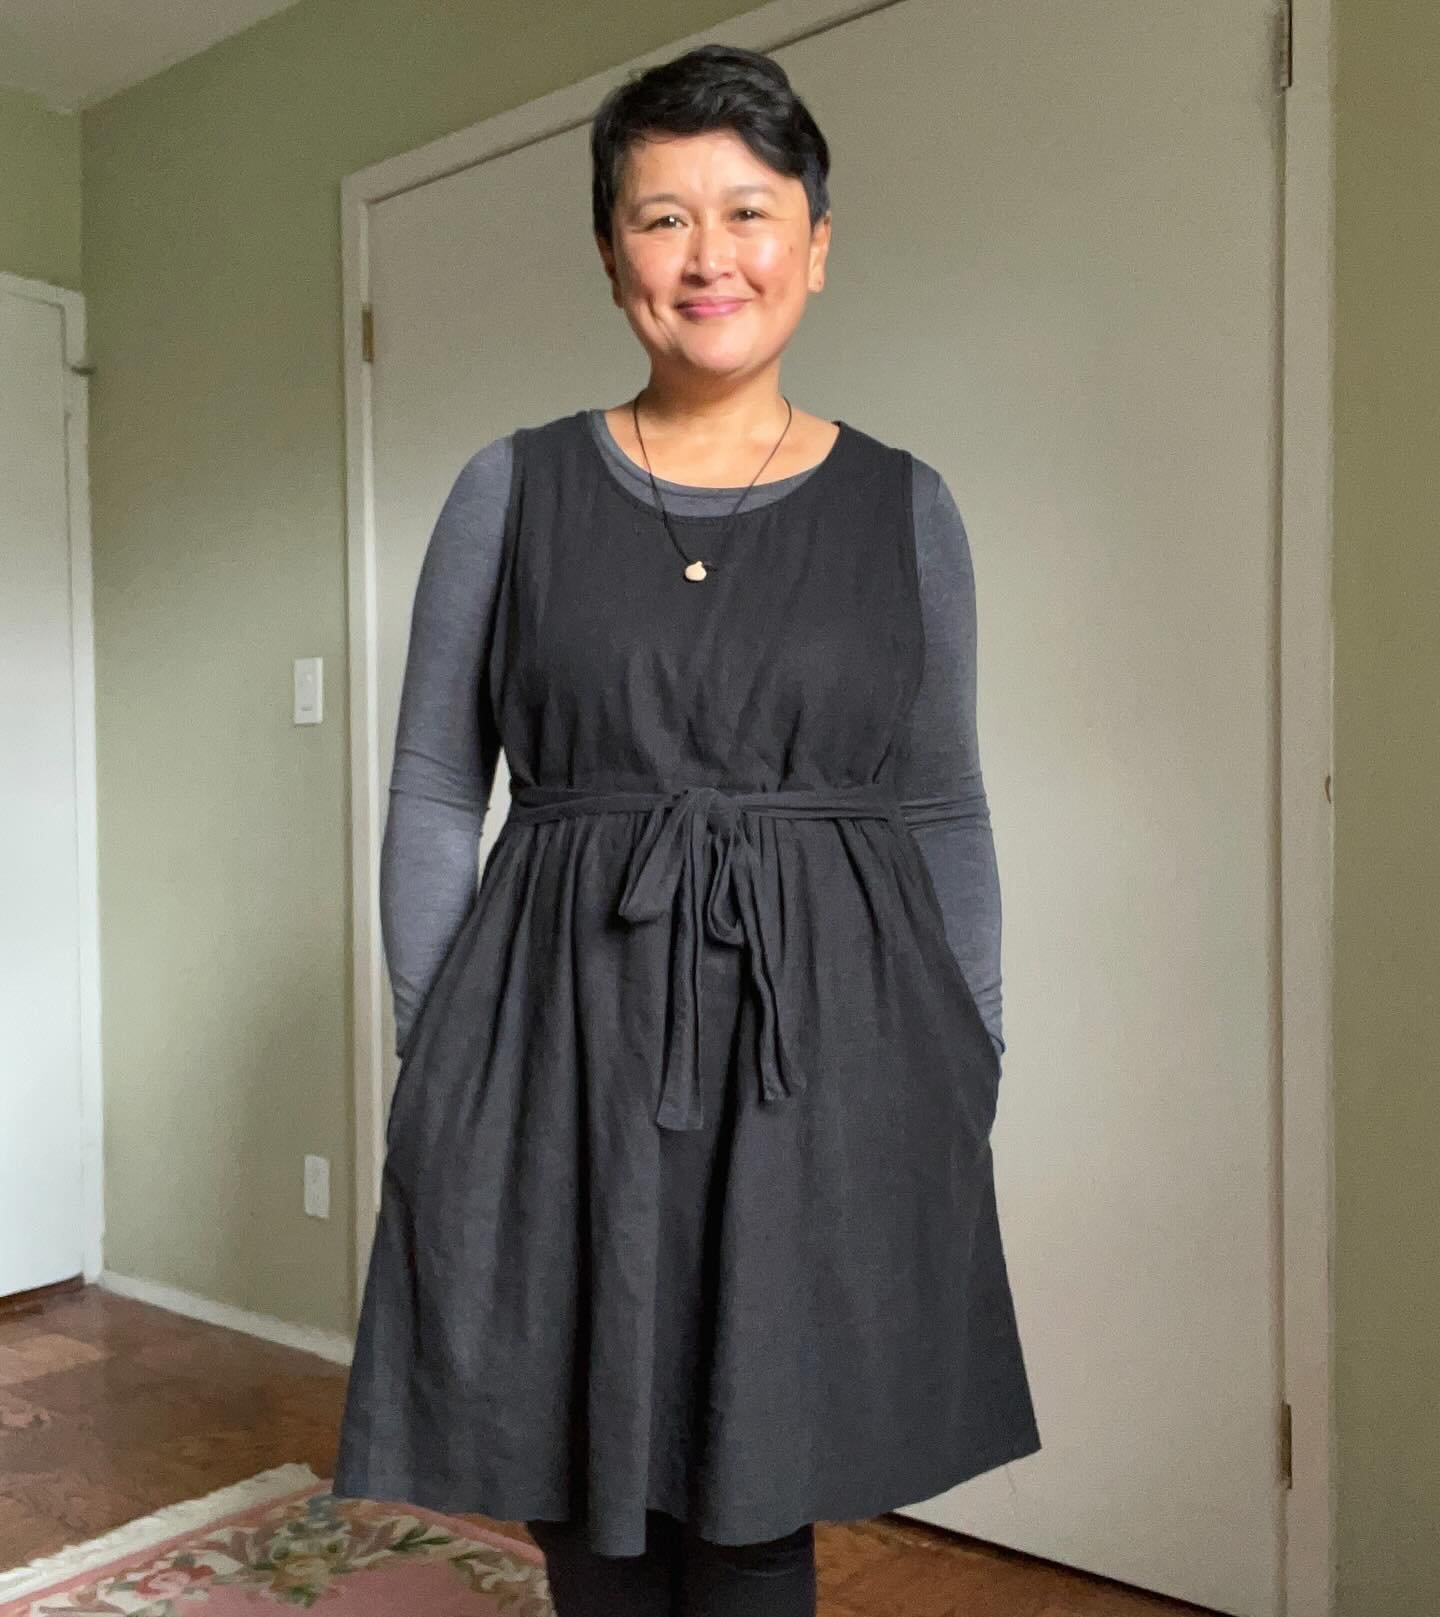 Me Made May Day 16
#sewliberated #hinterlanddress
with layers to keep warm

I say this for multiple patterns: I plan on making another&mdash;it&rsquo;s a versatile pattern 🙌😁 

#memademay24 #mmmay24
#memademay #sewingchallenge
#sewcialist #ilovesew